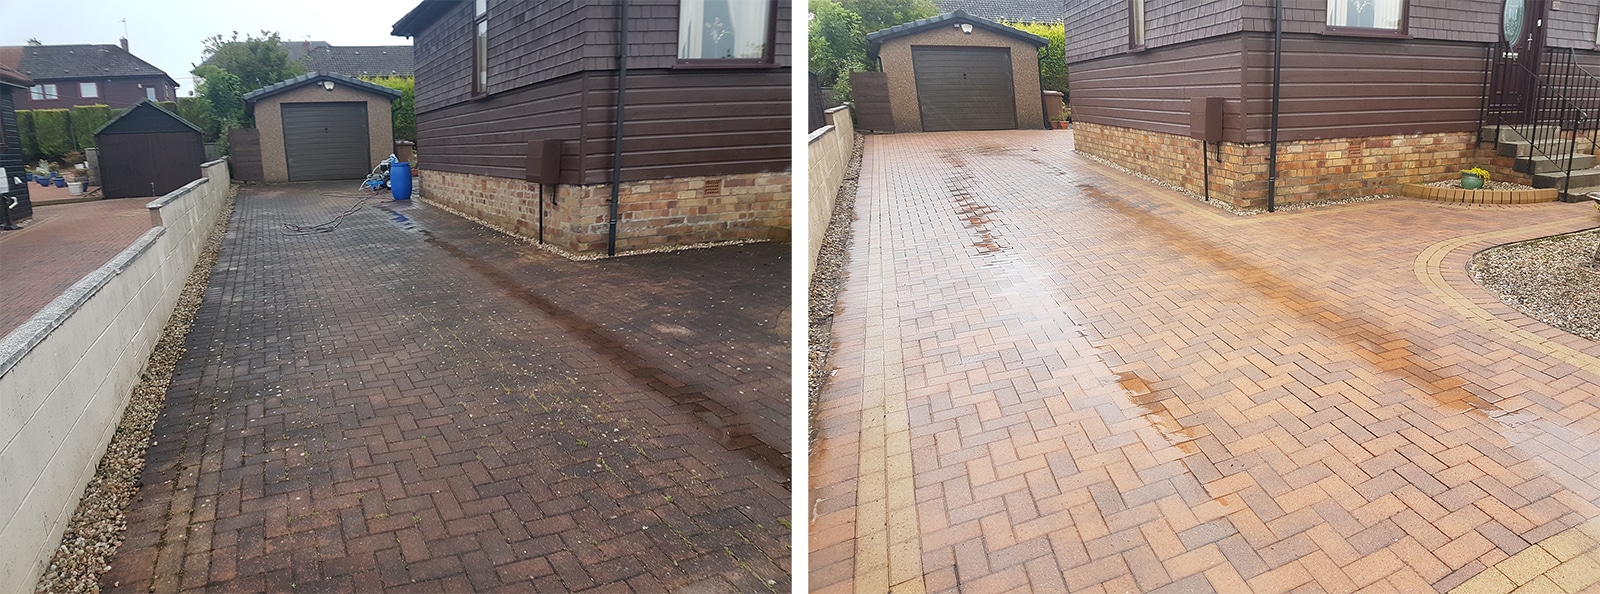 Driveway Cleaning Transformation